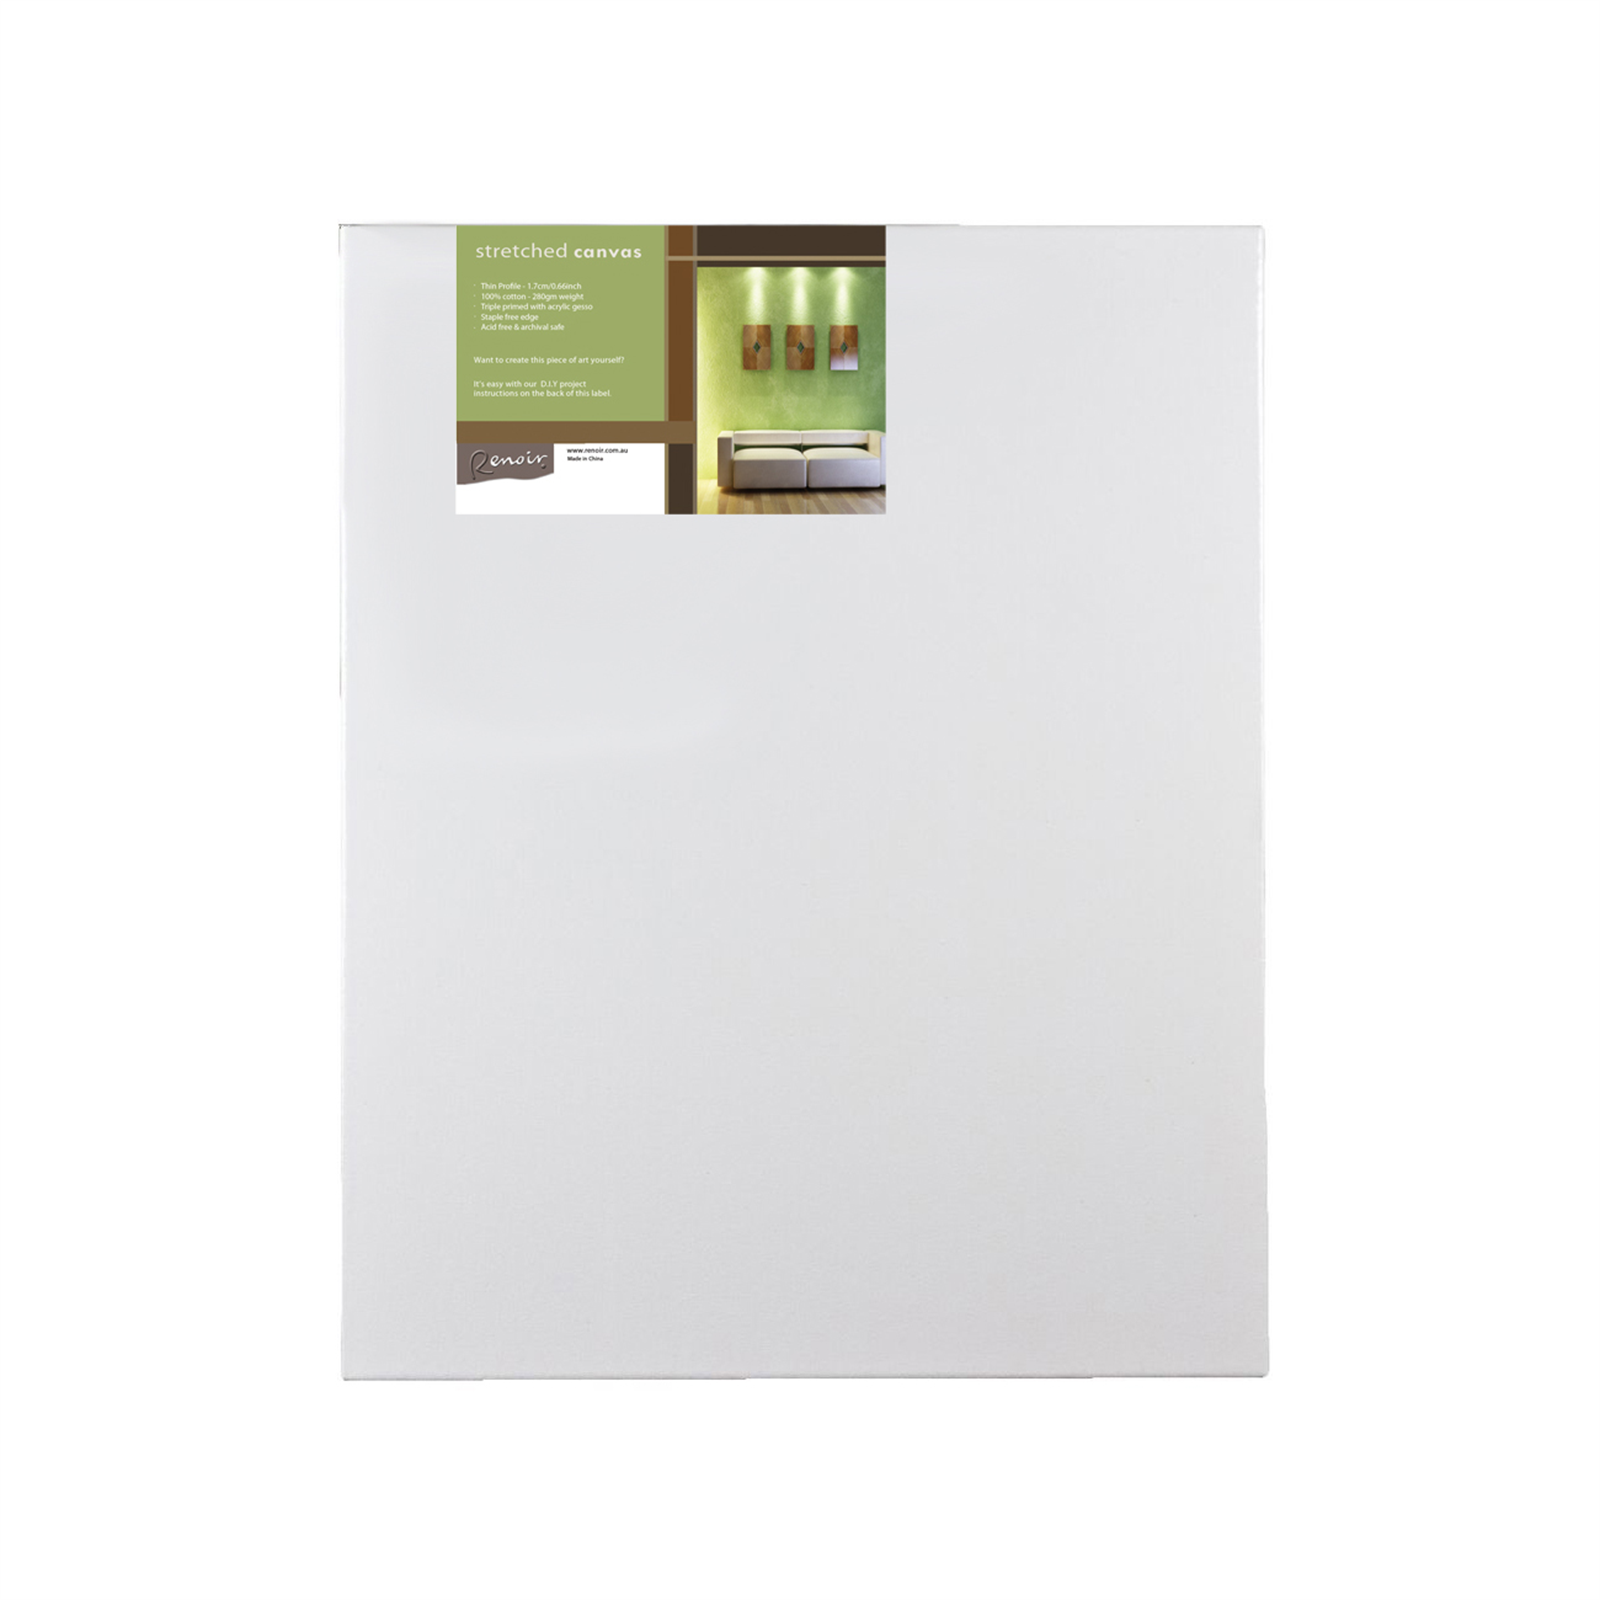 Renoir Thin Profile Stretched Canvas  - 406mm x 508mm